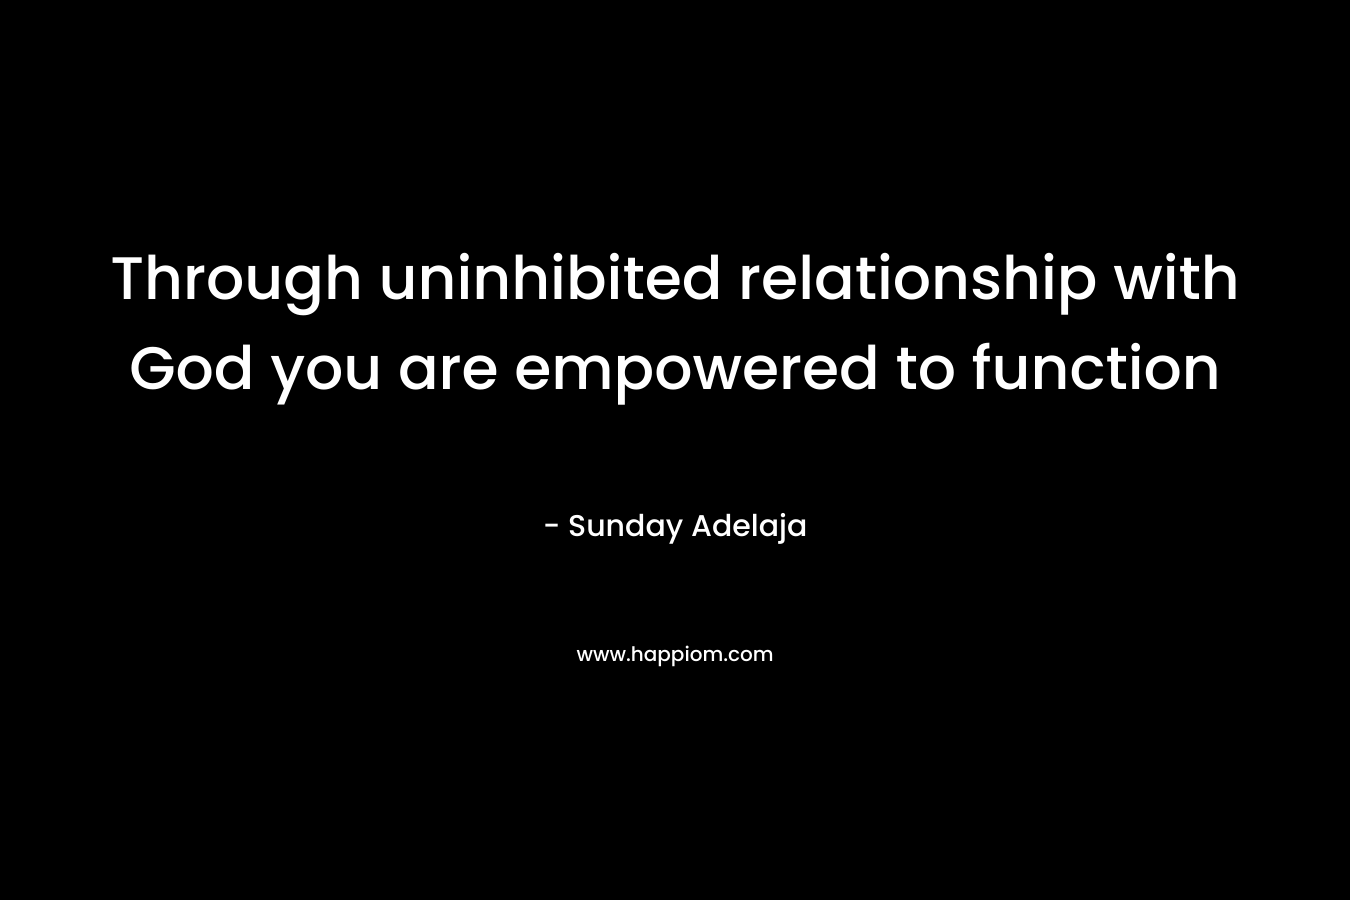 Through uninhibited relationship with God you are empowered to function